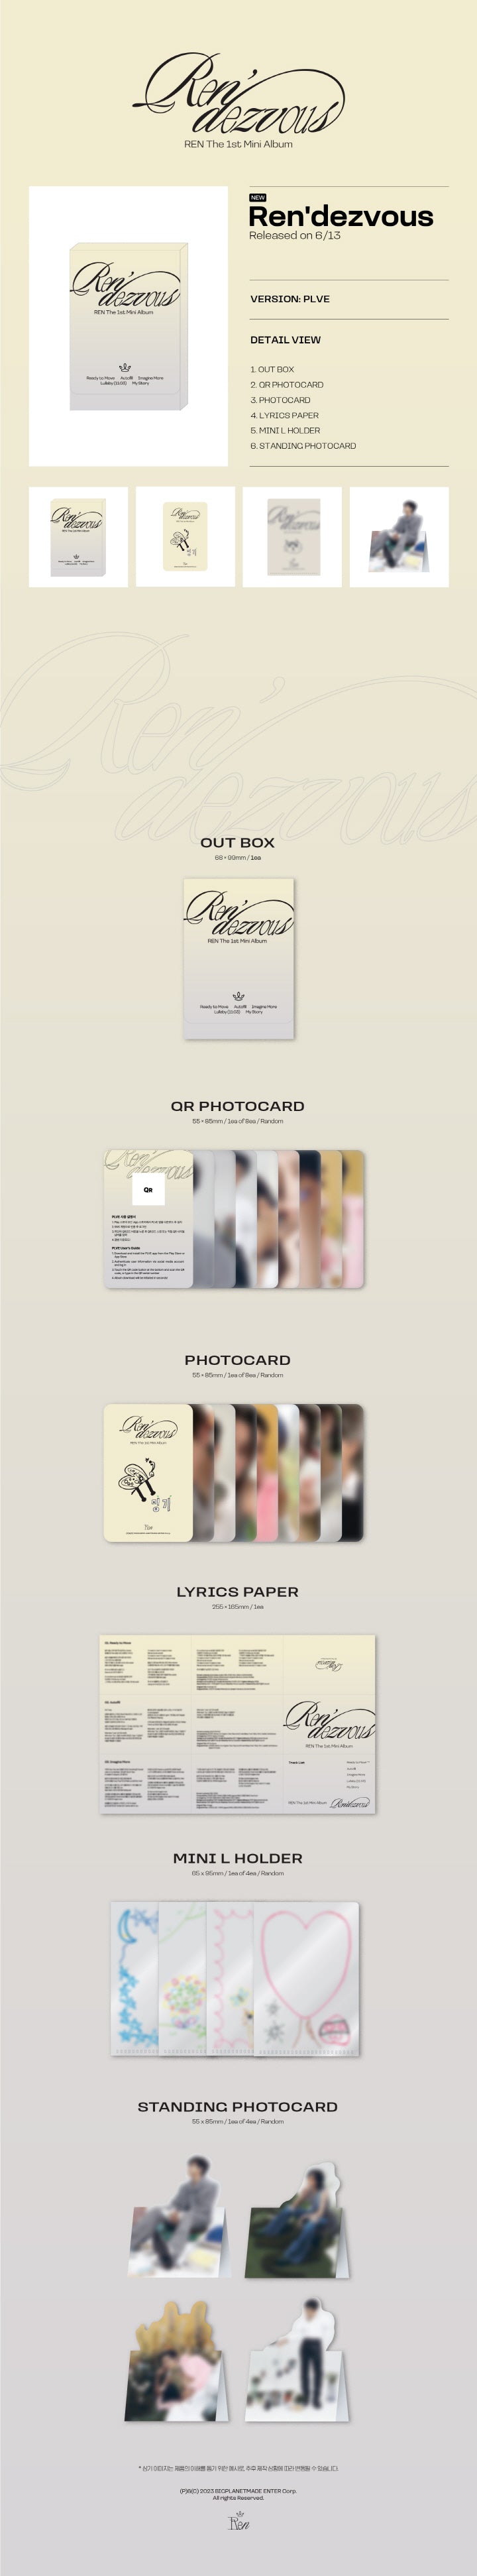 1 QR Photo Card (random out of 8 types)
1 Photo Card (random out of 8 types)
1 Lyrics Paper
1 Mini L Holder (random out of...